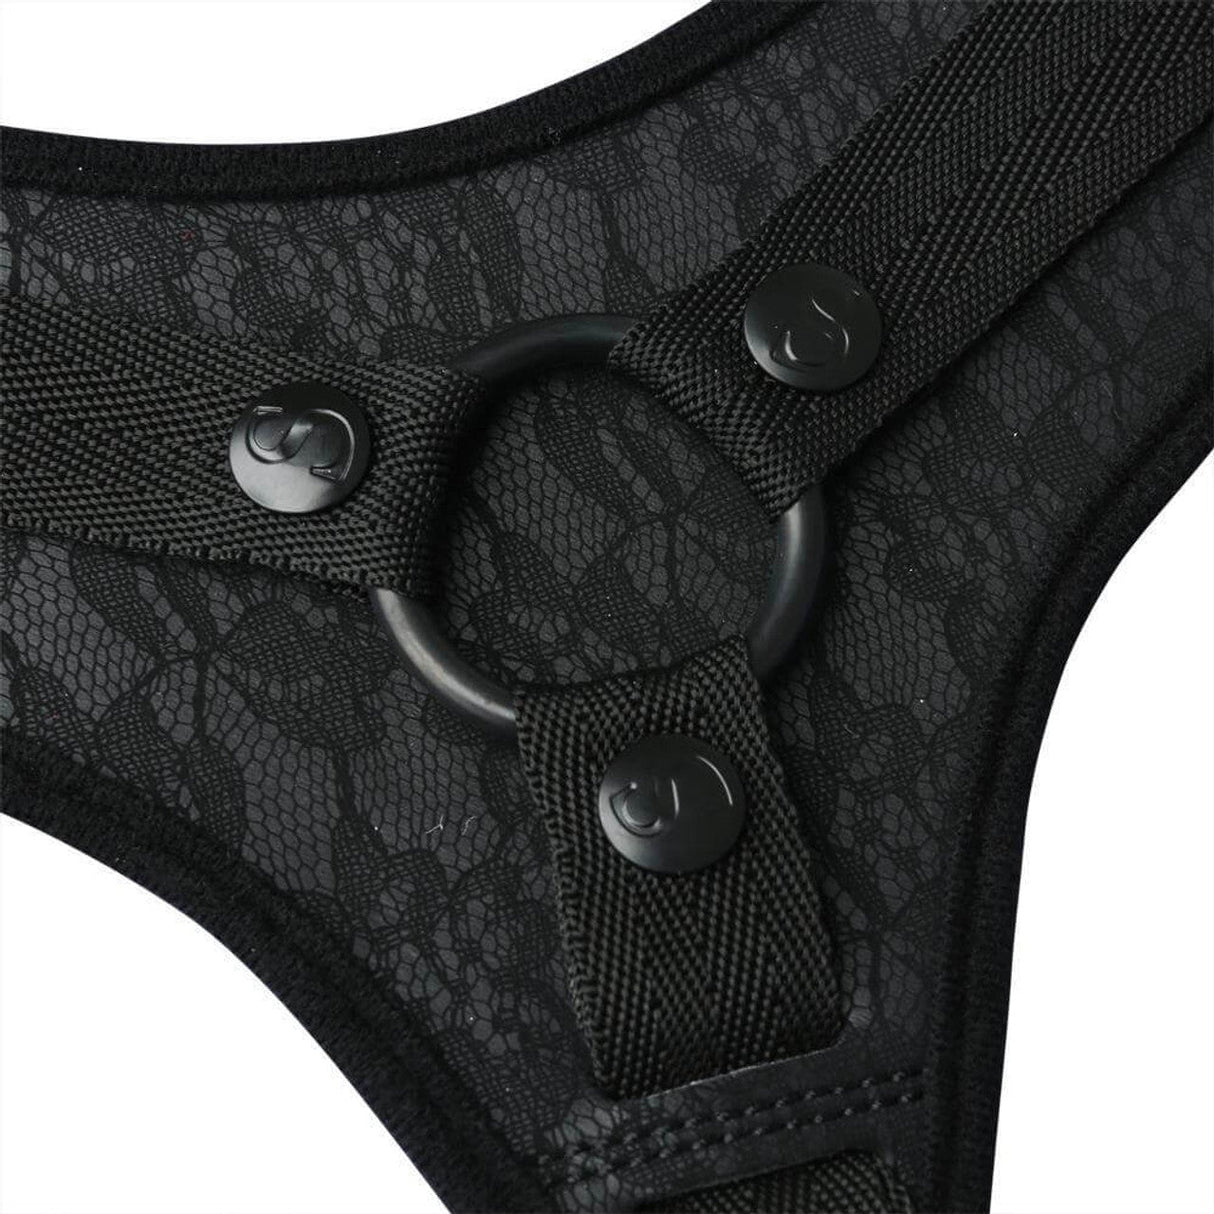 Sincerely Black Lace Strap-On Harness